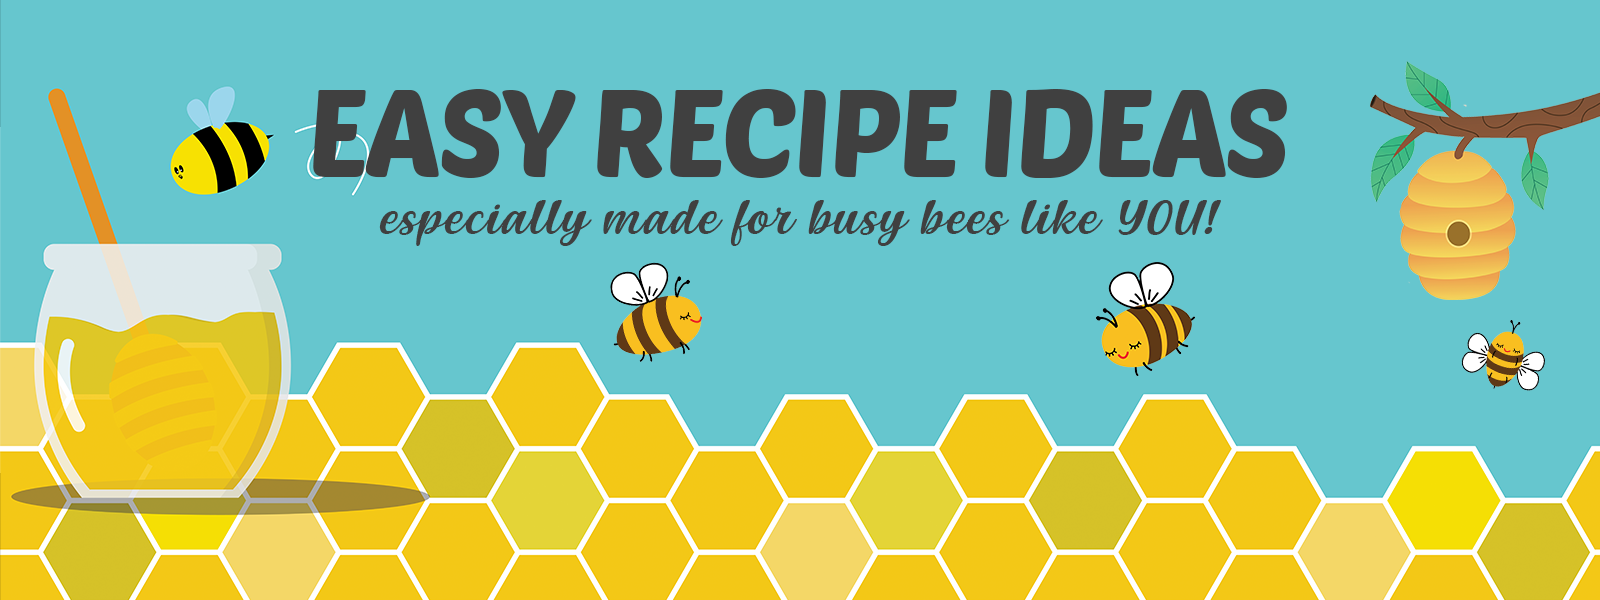 Easy Recipe Ideas for busy bees like you!